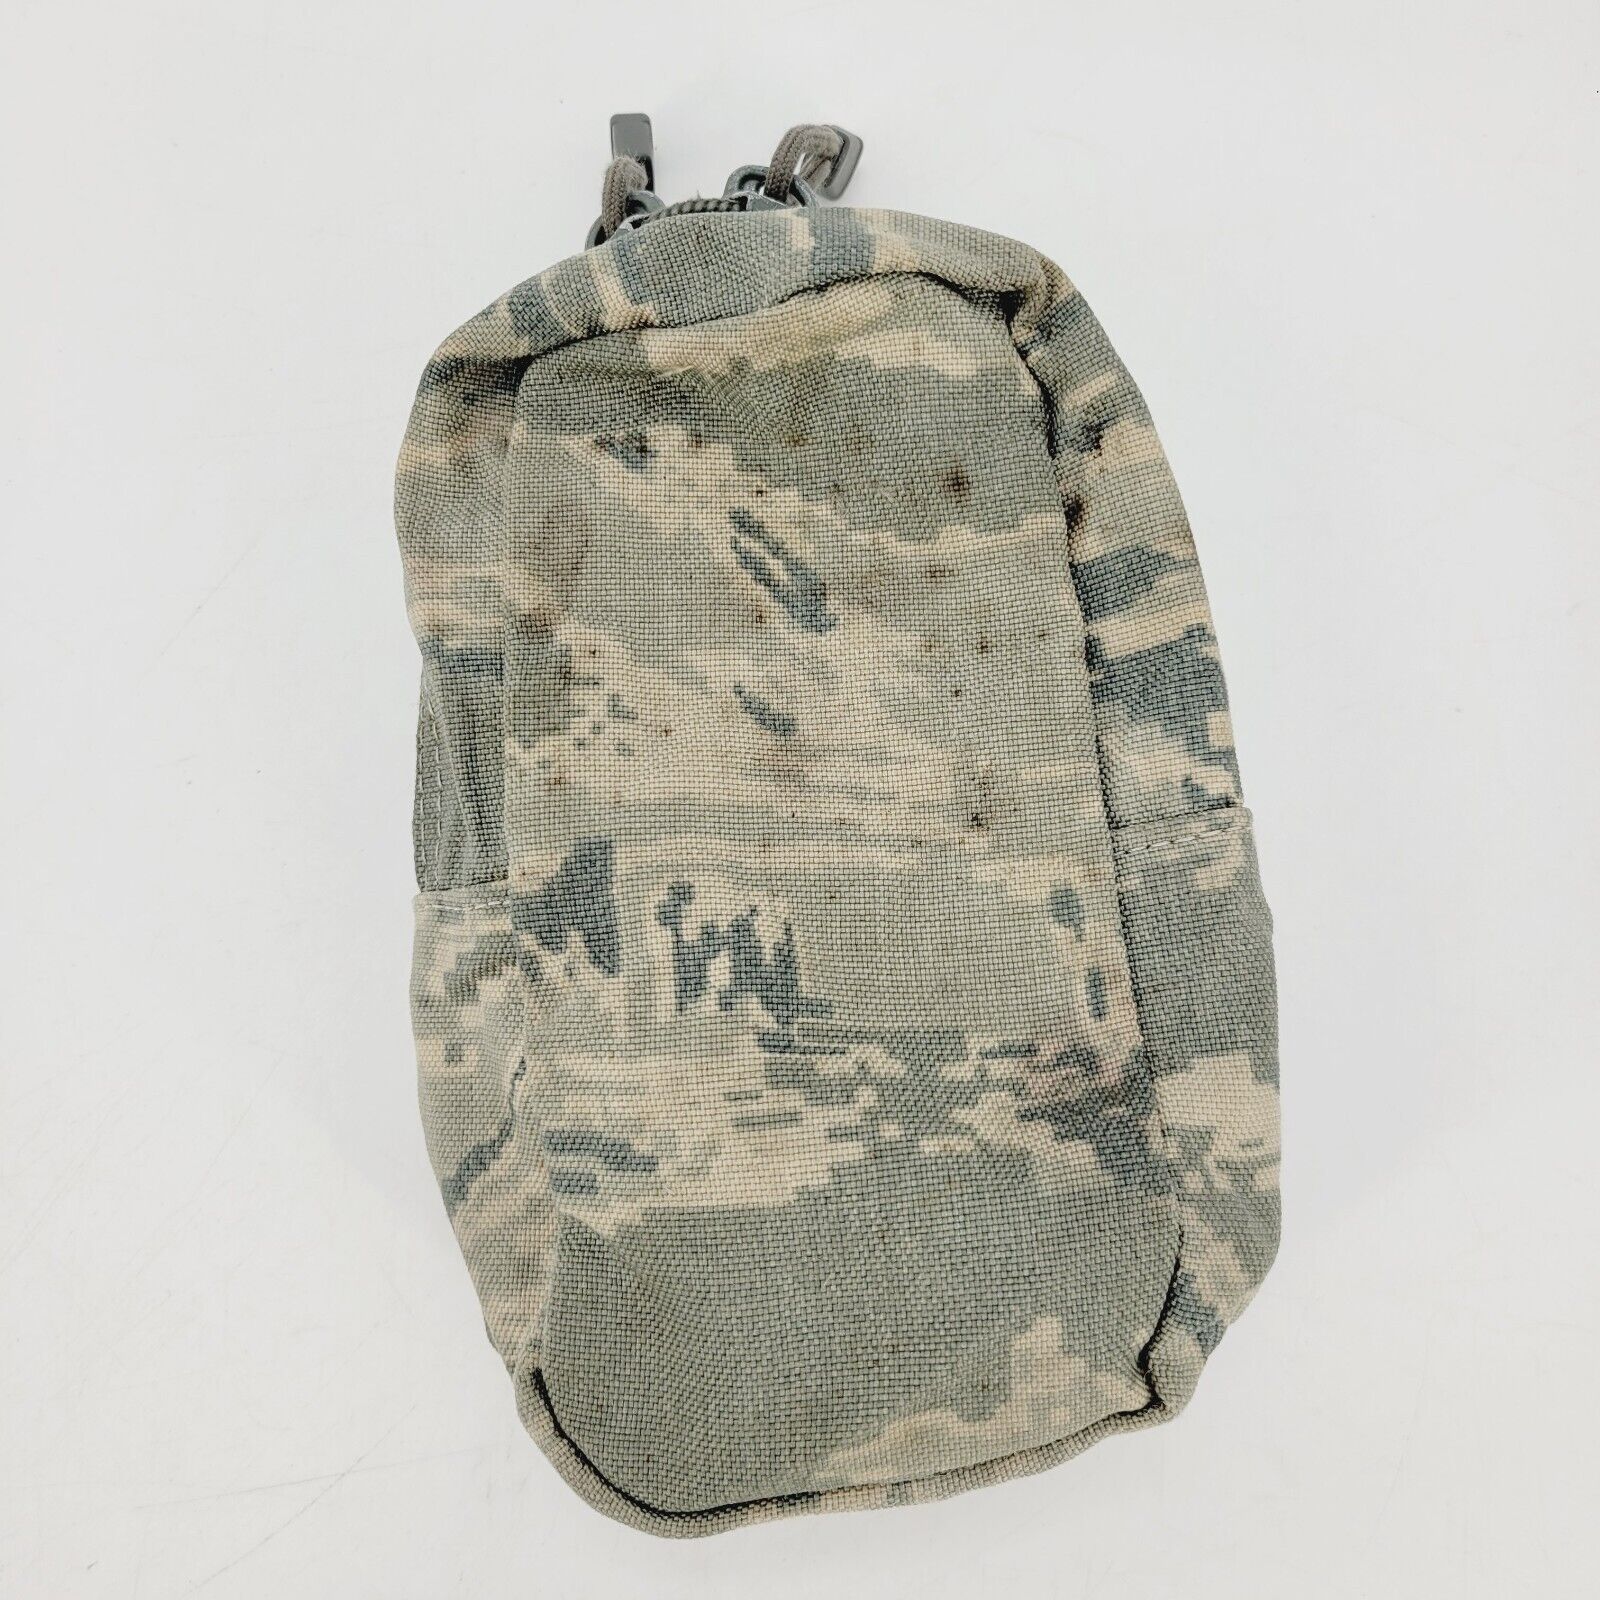 USAF ABU DFLCS Vertical Medical Pouch MOLLE DF-LCS MMP Utility